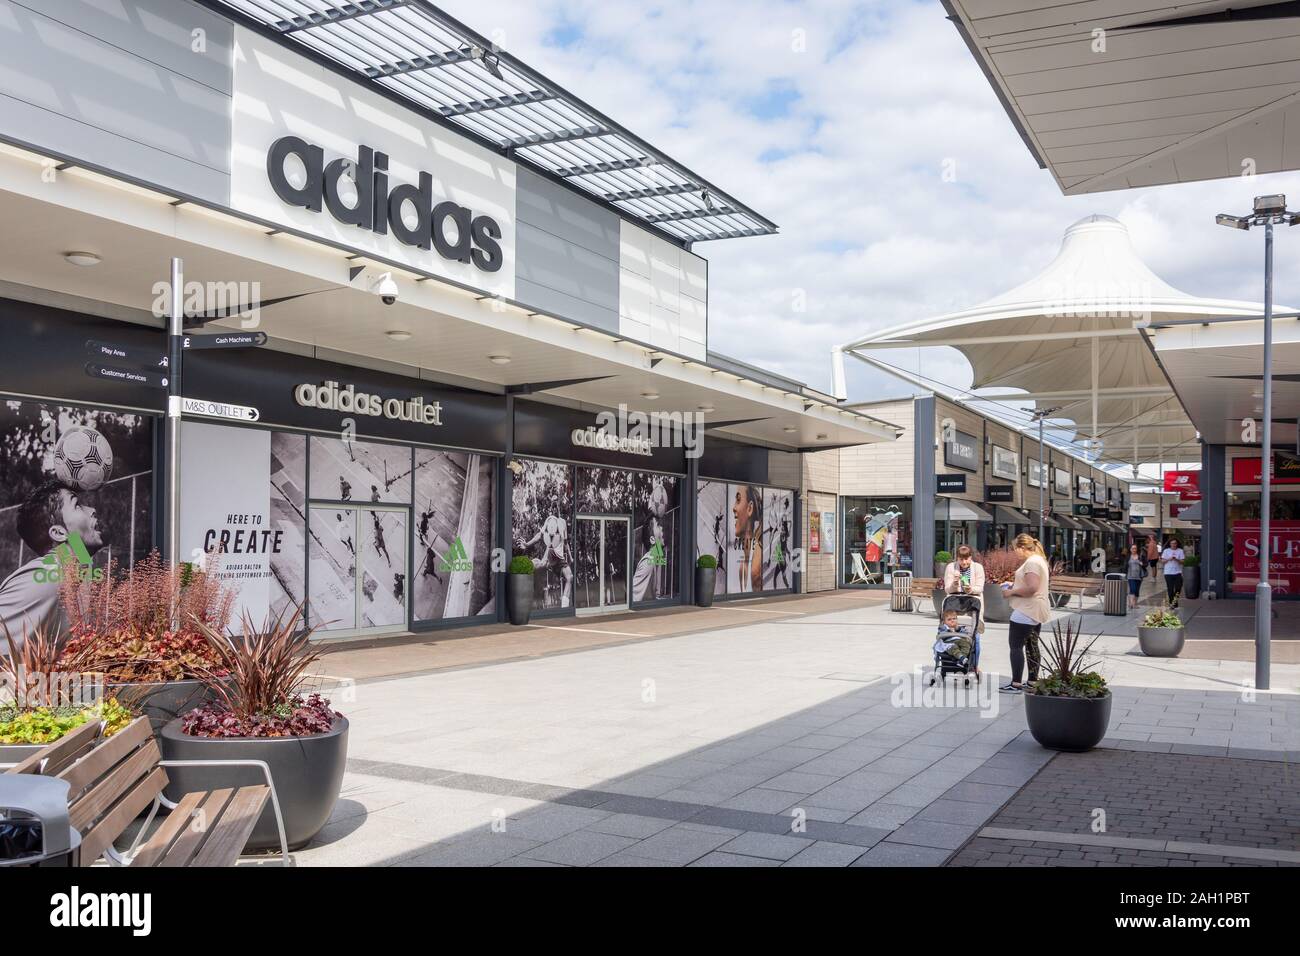 Dalton park outlet hi-res stock photography and images - Alamy